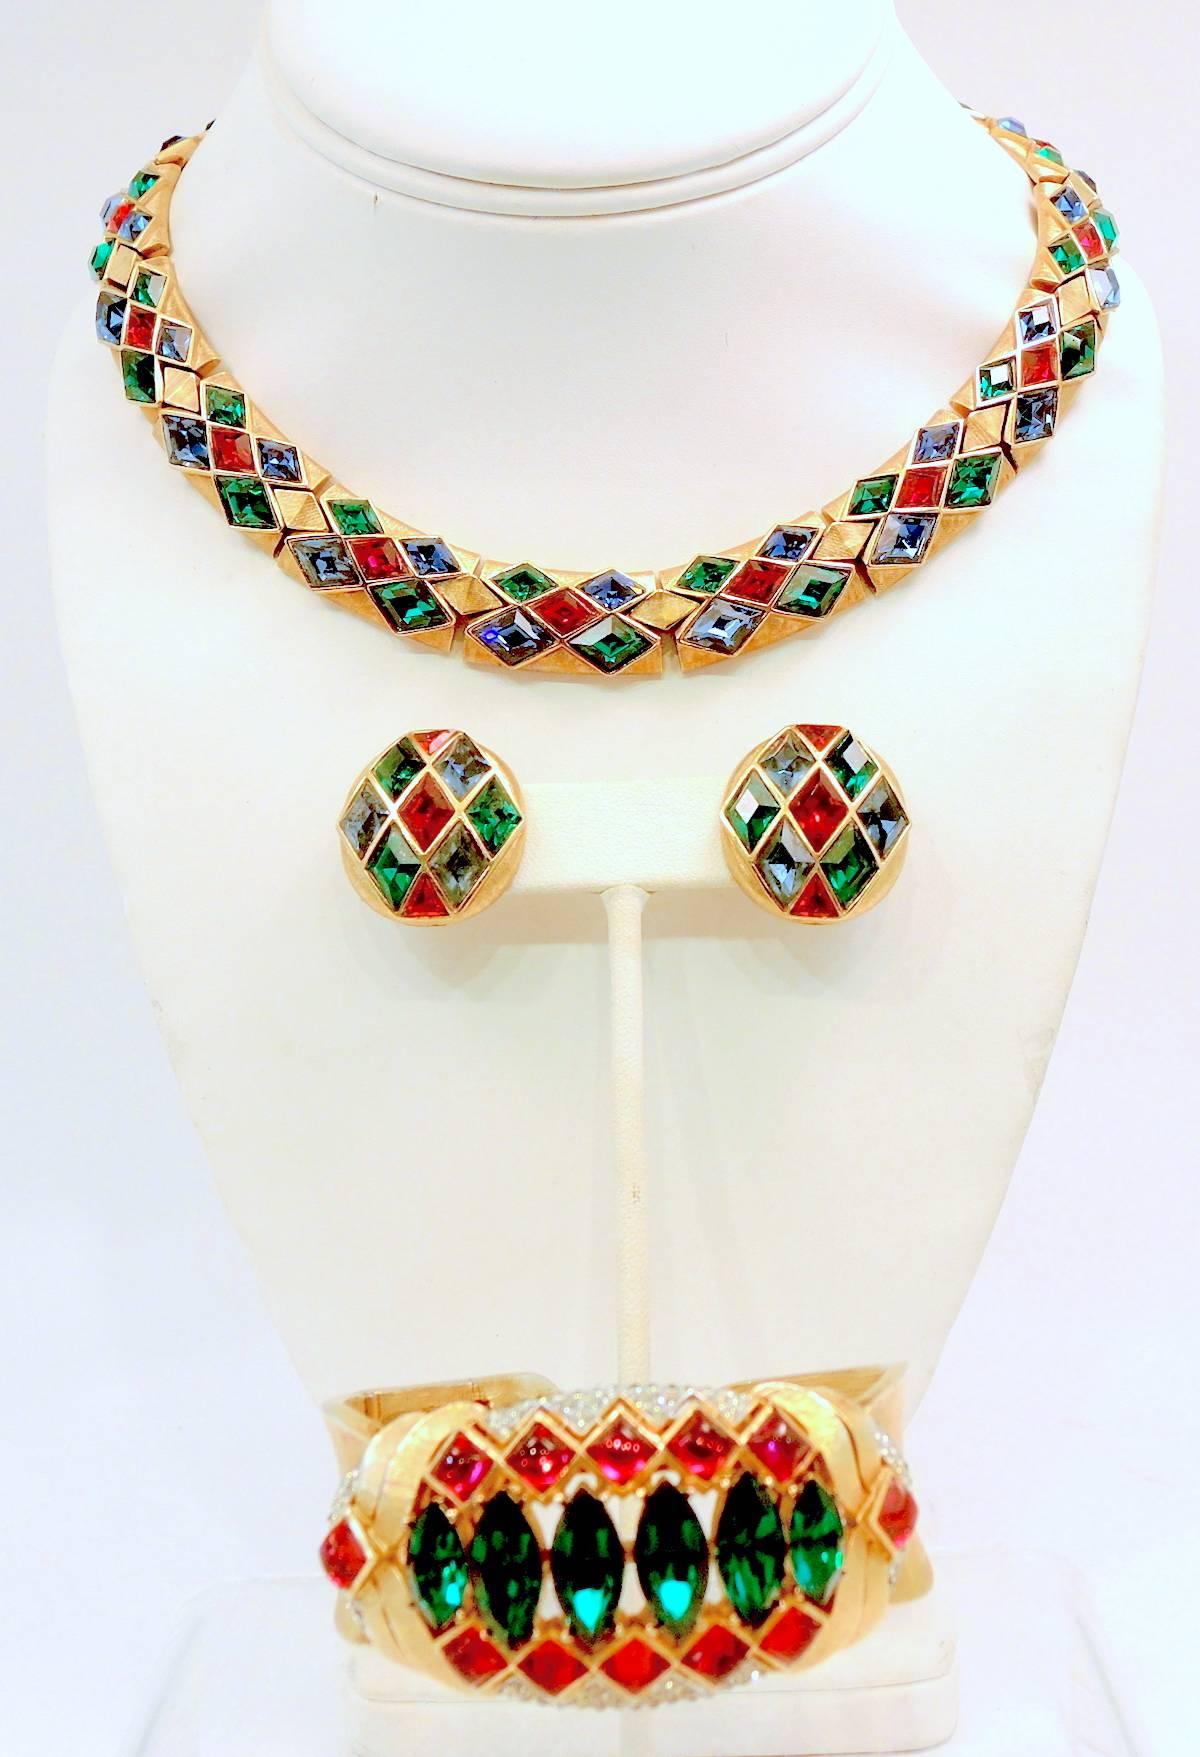 . Trifari created their own Moghul style, which is highly collectible especially when found together like this set. The necklace has segmented glass diamond shaped emeralds, rubies and sapphires. It is very flexible and comfortable to wear around